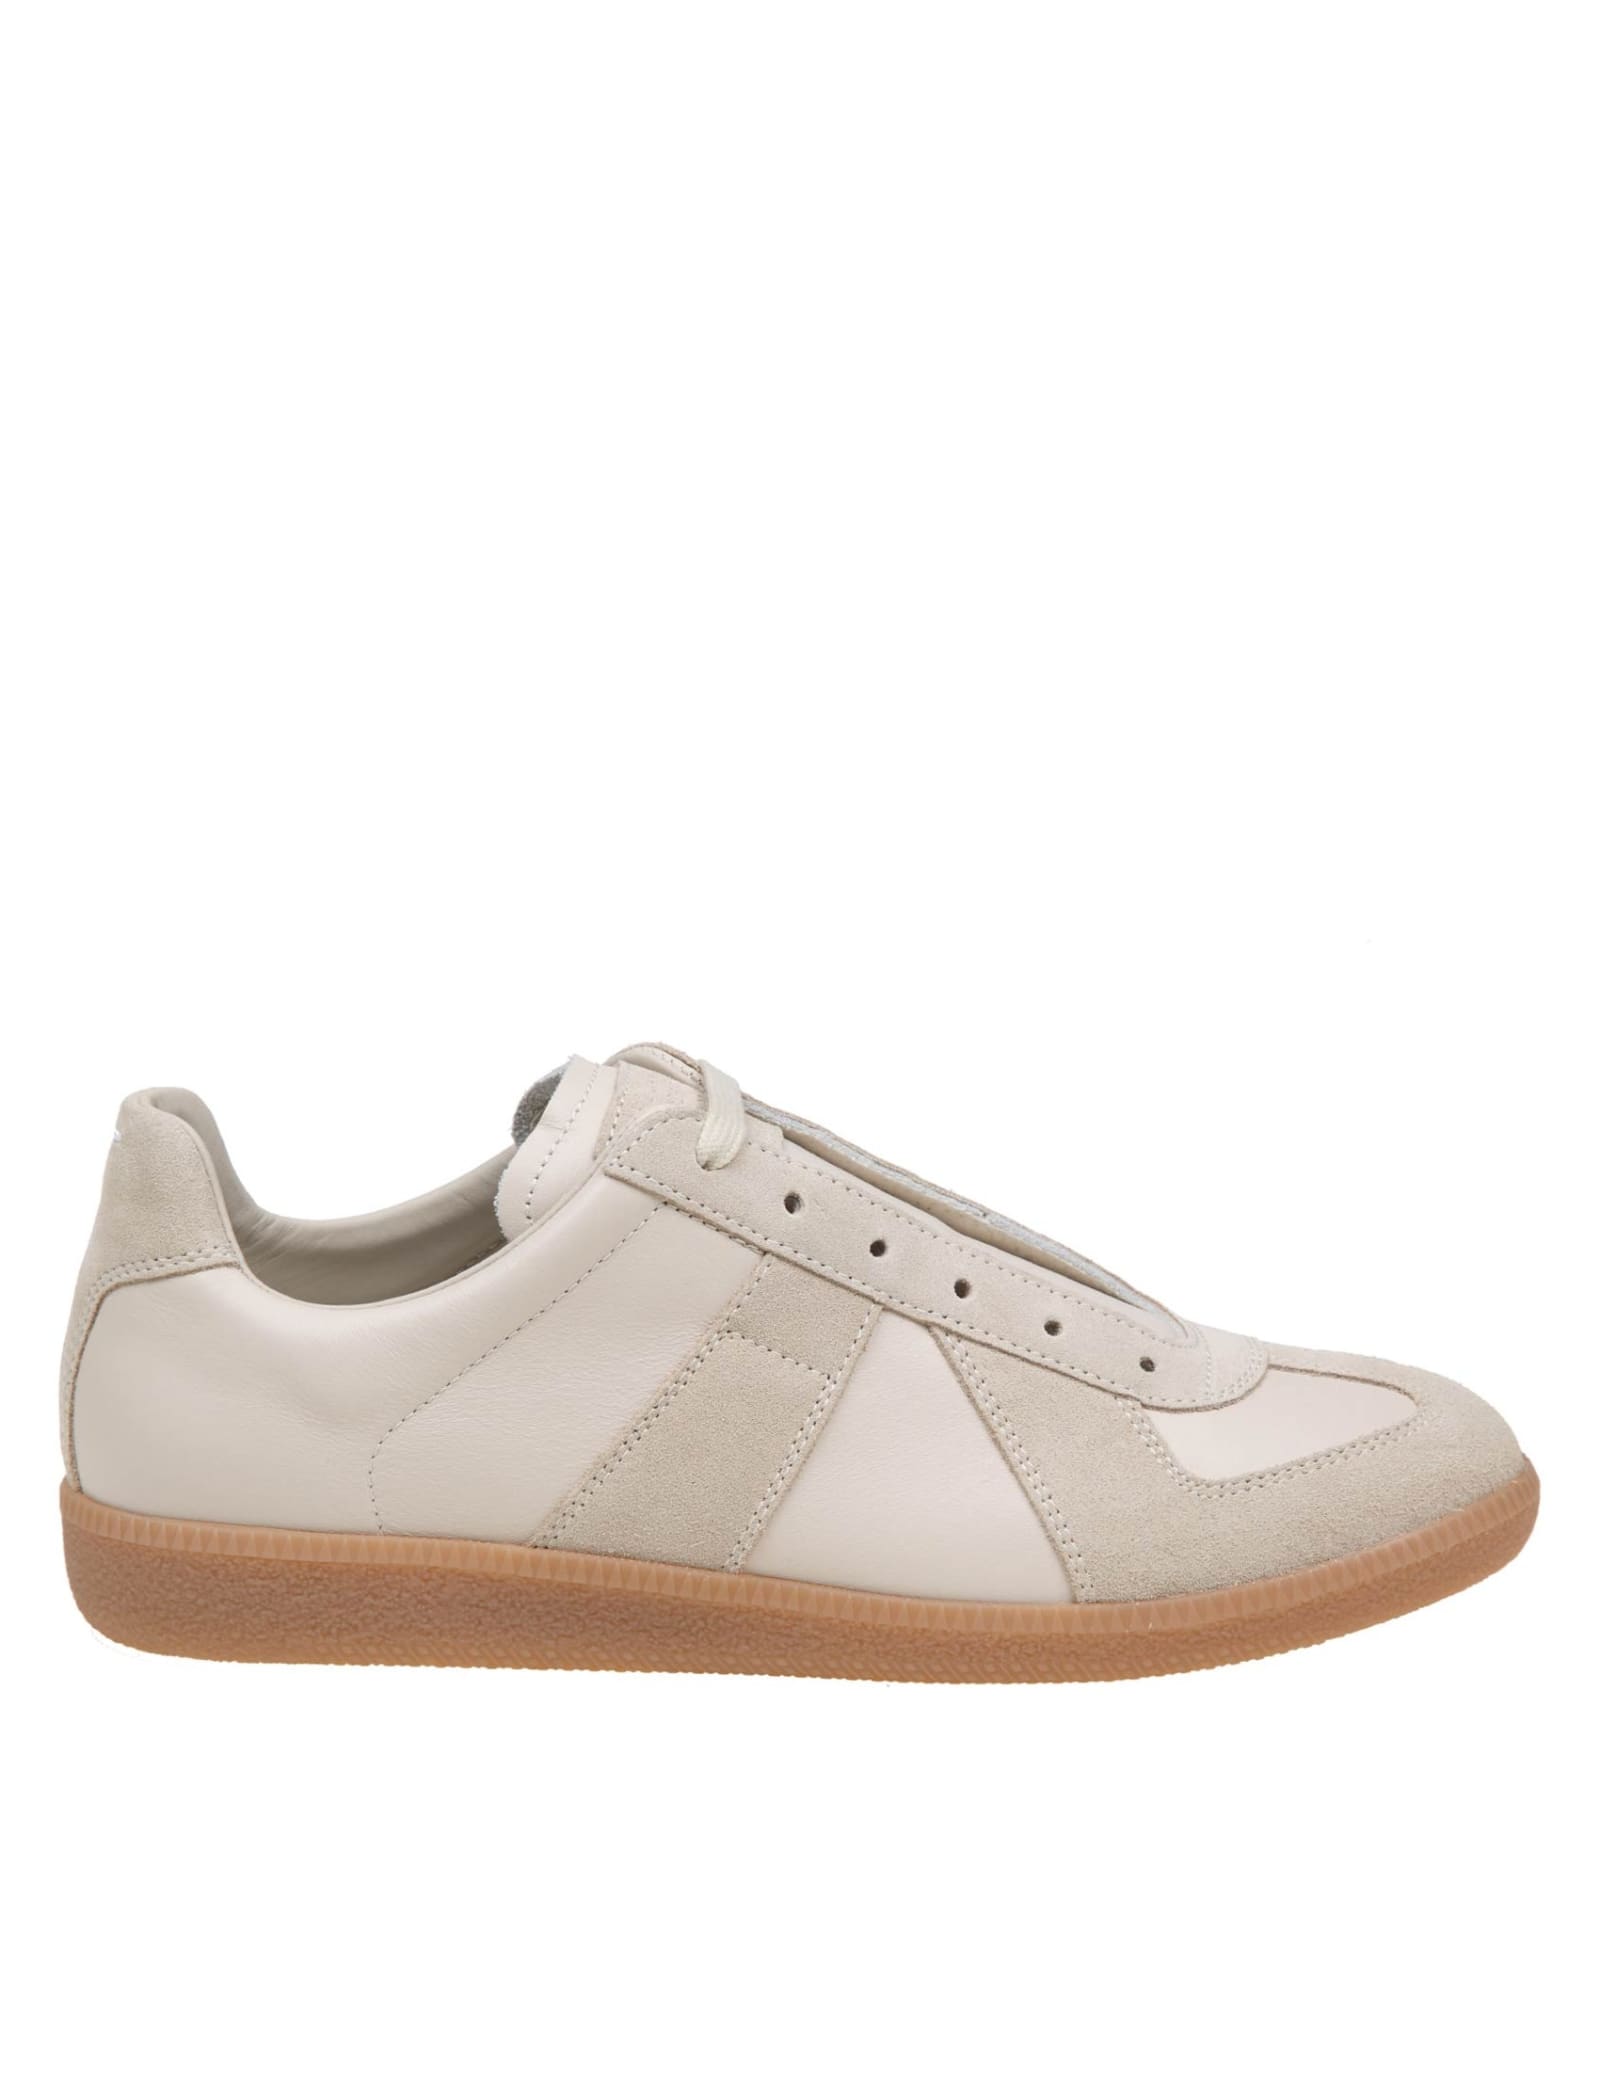 Maison Margiela Replica Sneakers In Leather And Suede In Beige/grigio